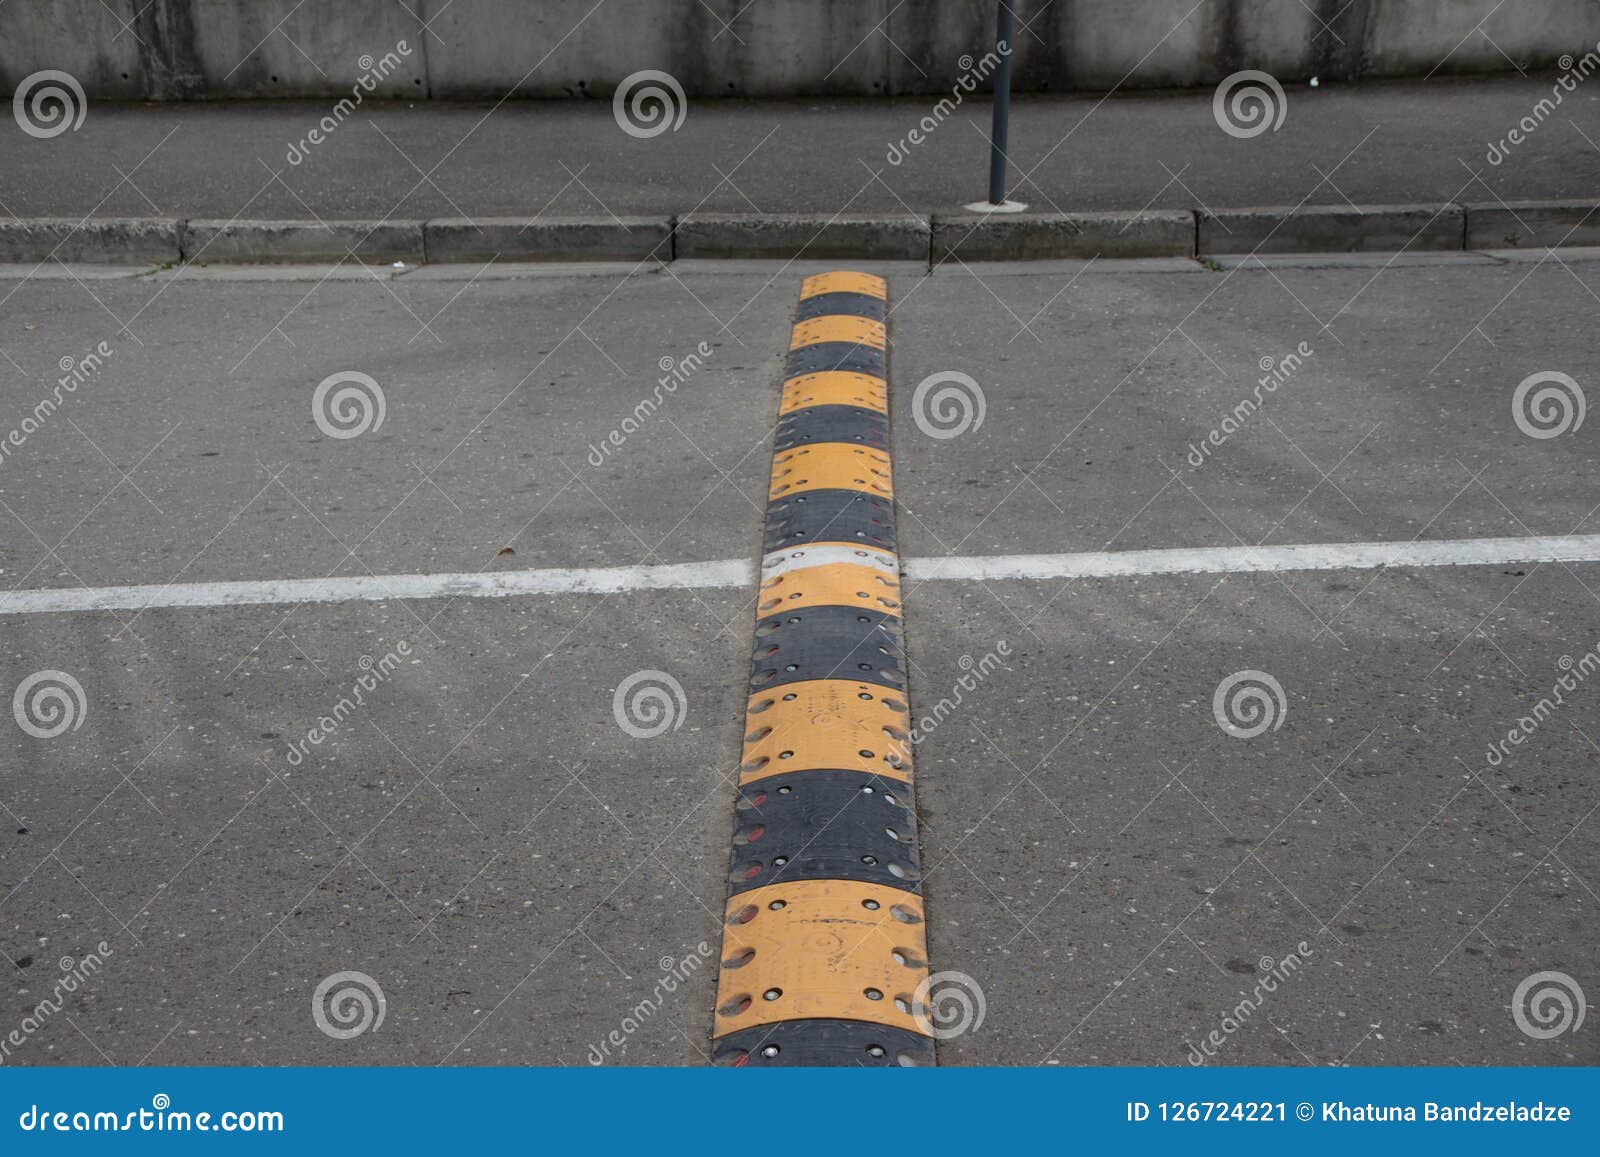 Yellow And Black Striped Speed Bump On An Asphalt Road Stock Image